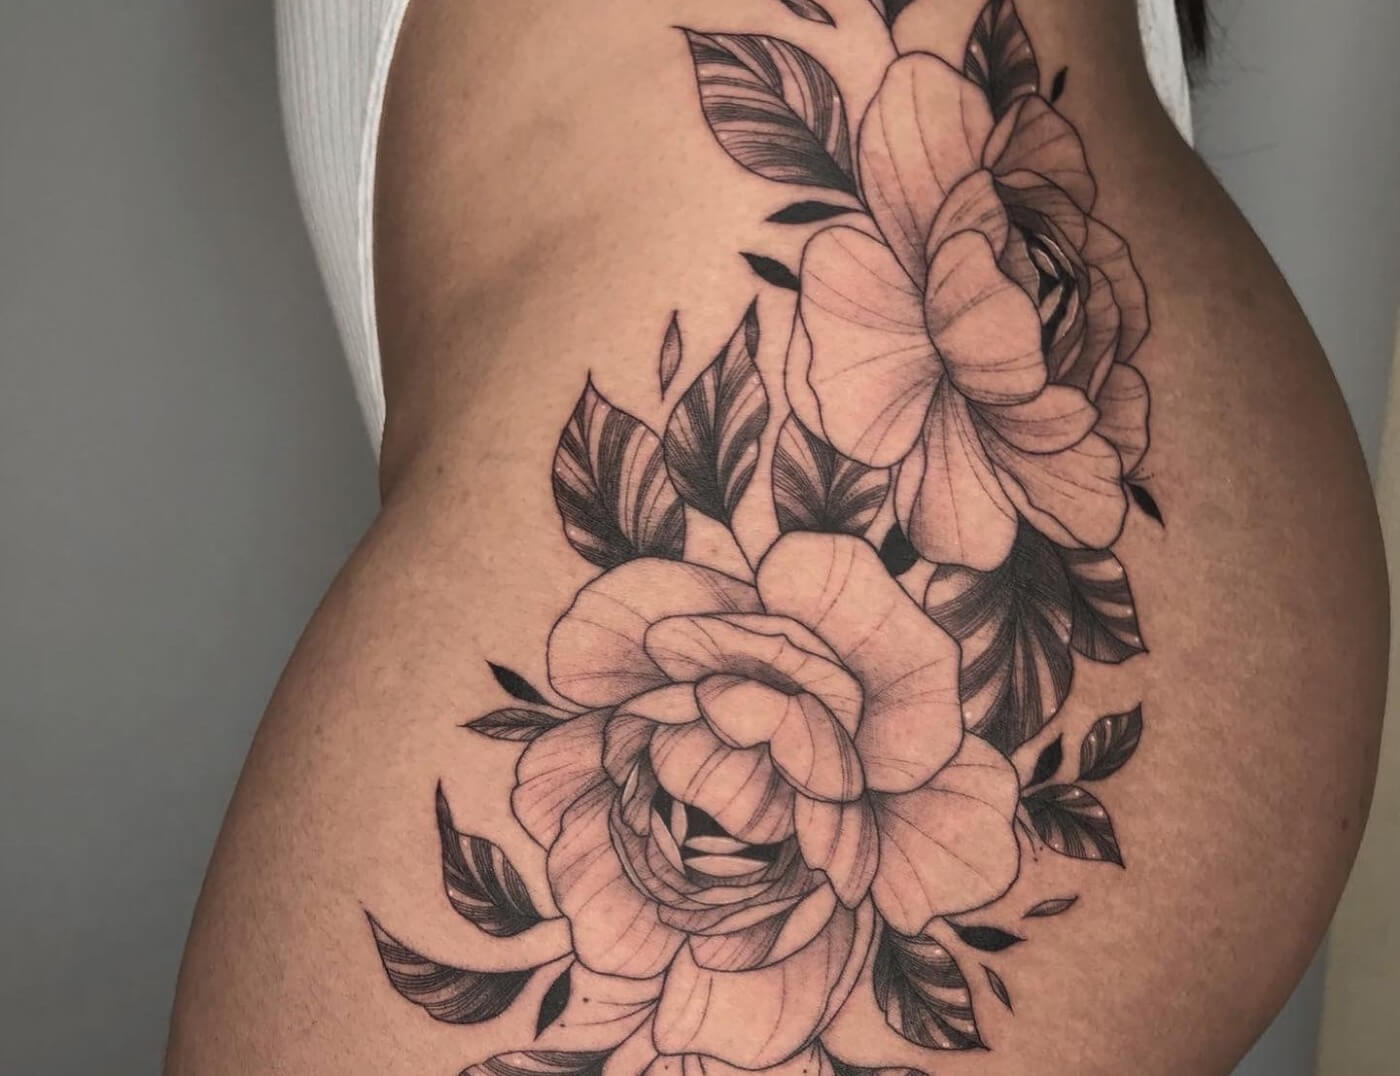 Rose Flower Tattoo By International resident Artist Rene Cristobal. Rene is Chilean artist from Vision Tattoo Studio in Concepcion, Chile. This artwork took 7 hours to complete. Done for his client Luyersii Coronado. Iron Palm is open late night until 2AM. Call 404-973-7828 or stop by for a free consultation.